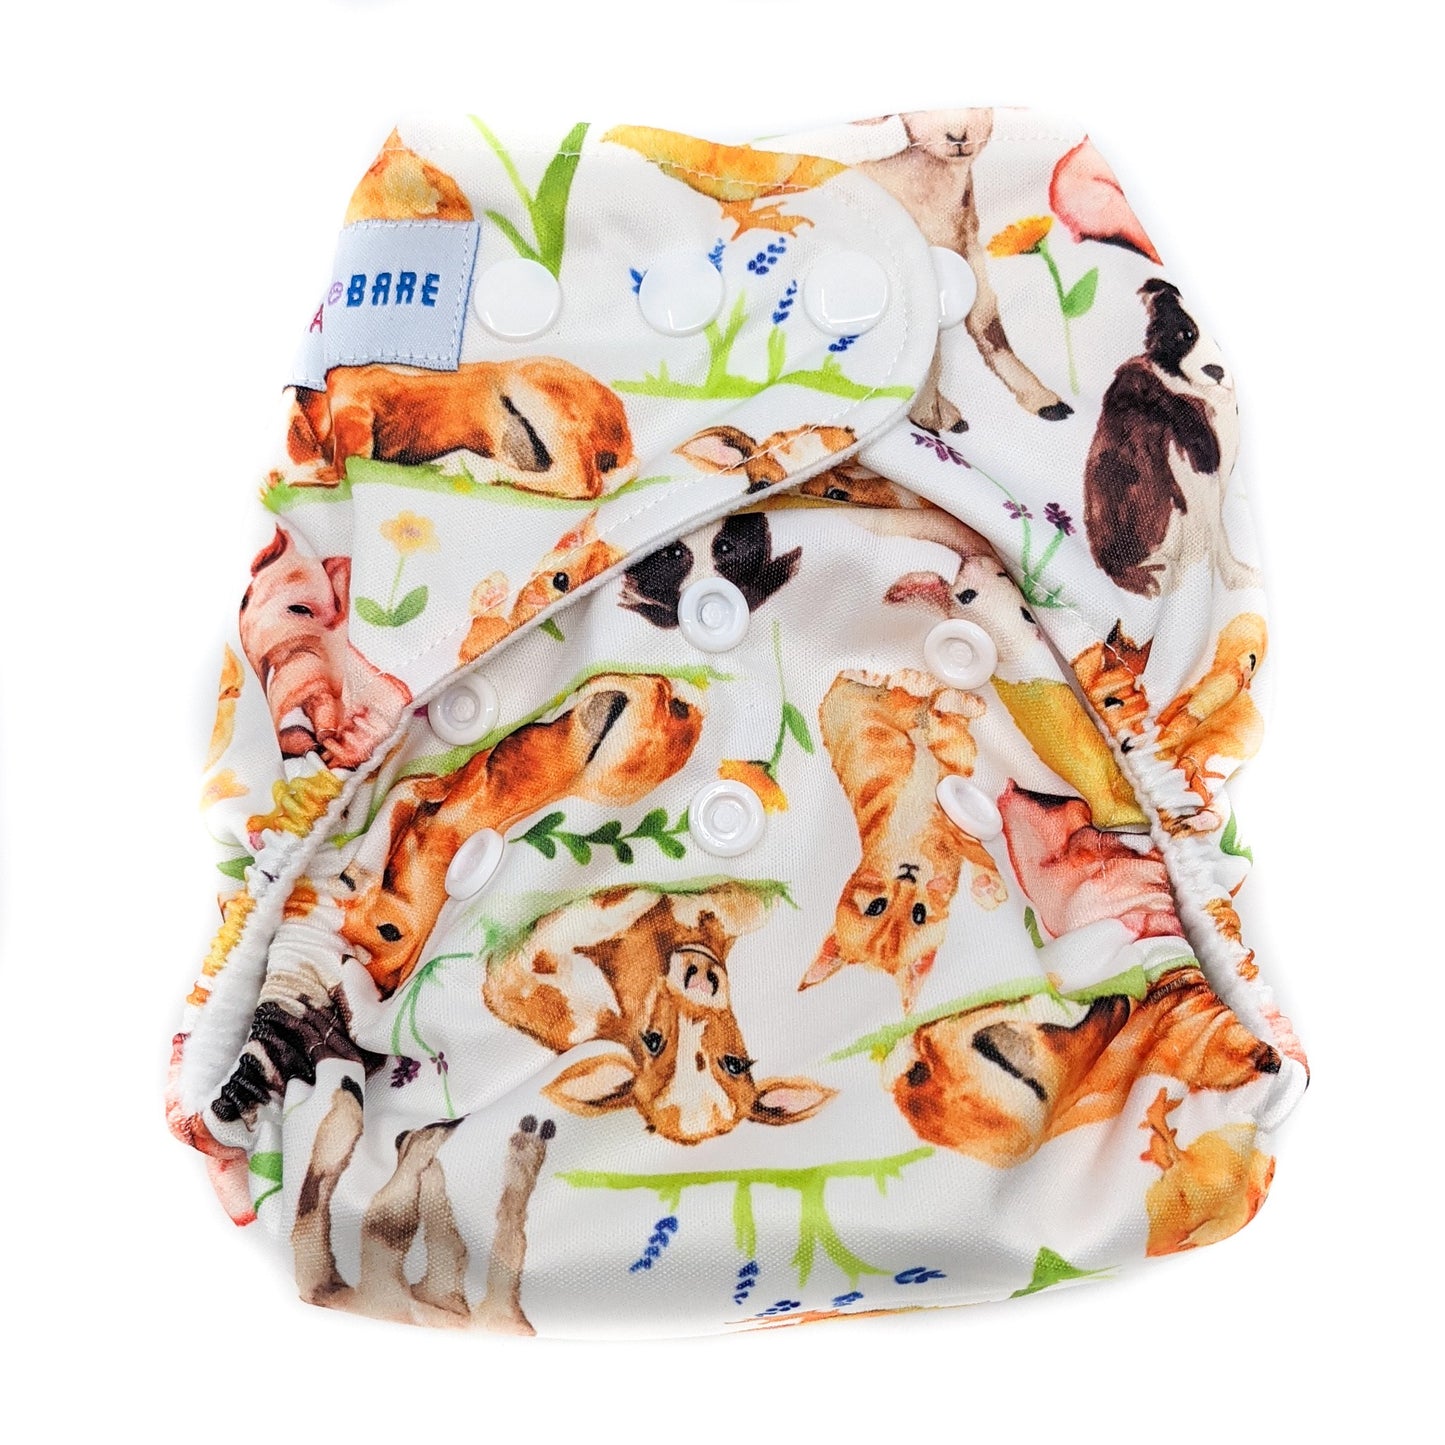 Trial Pack - 2 x AI2 Cloth Nappies & a free booster